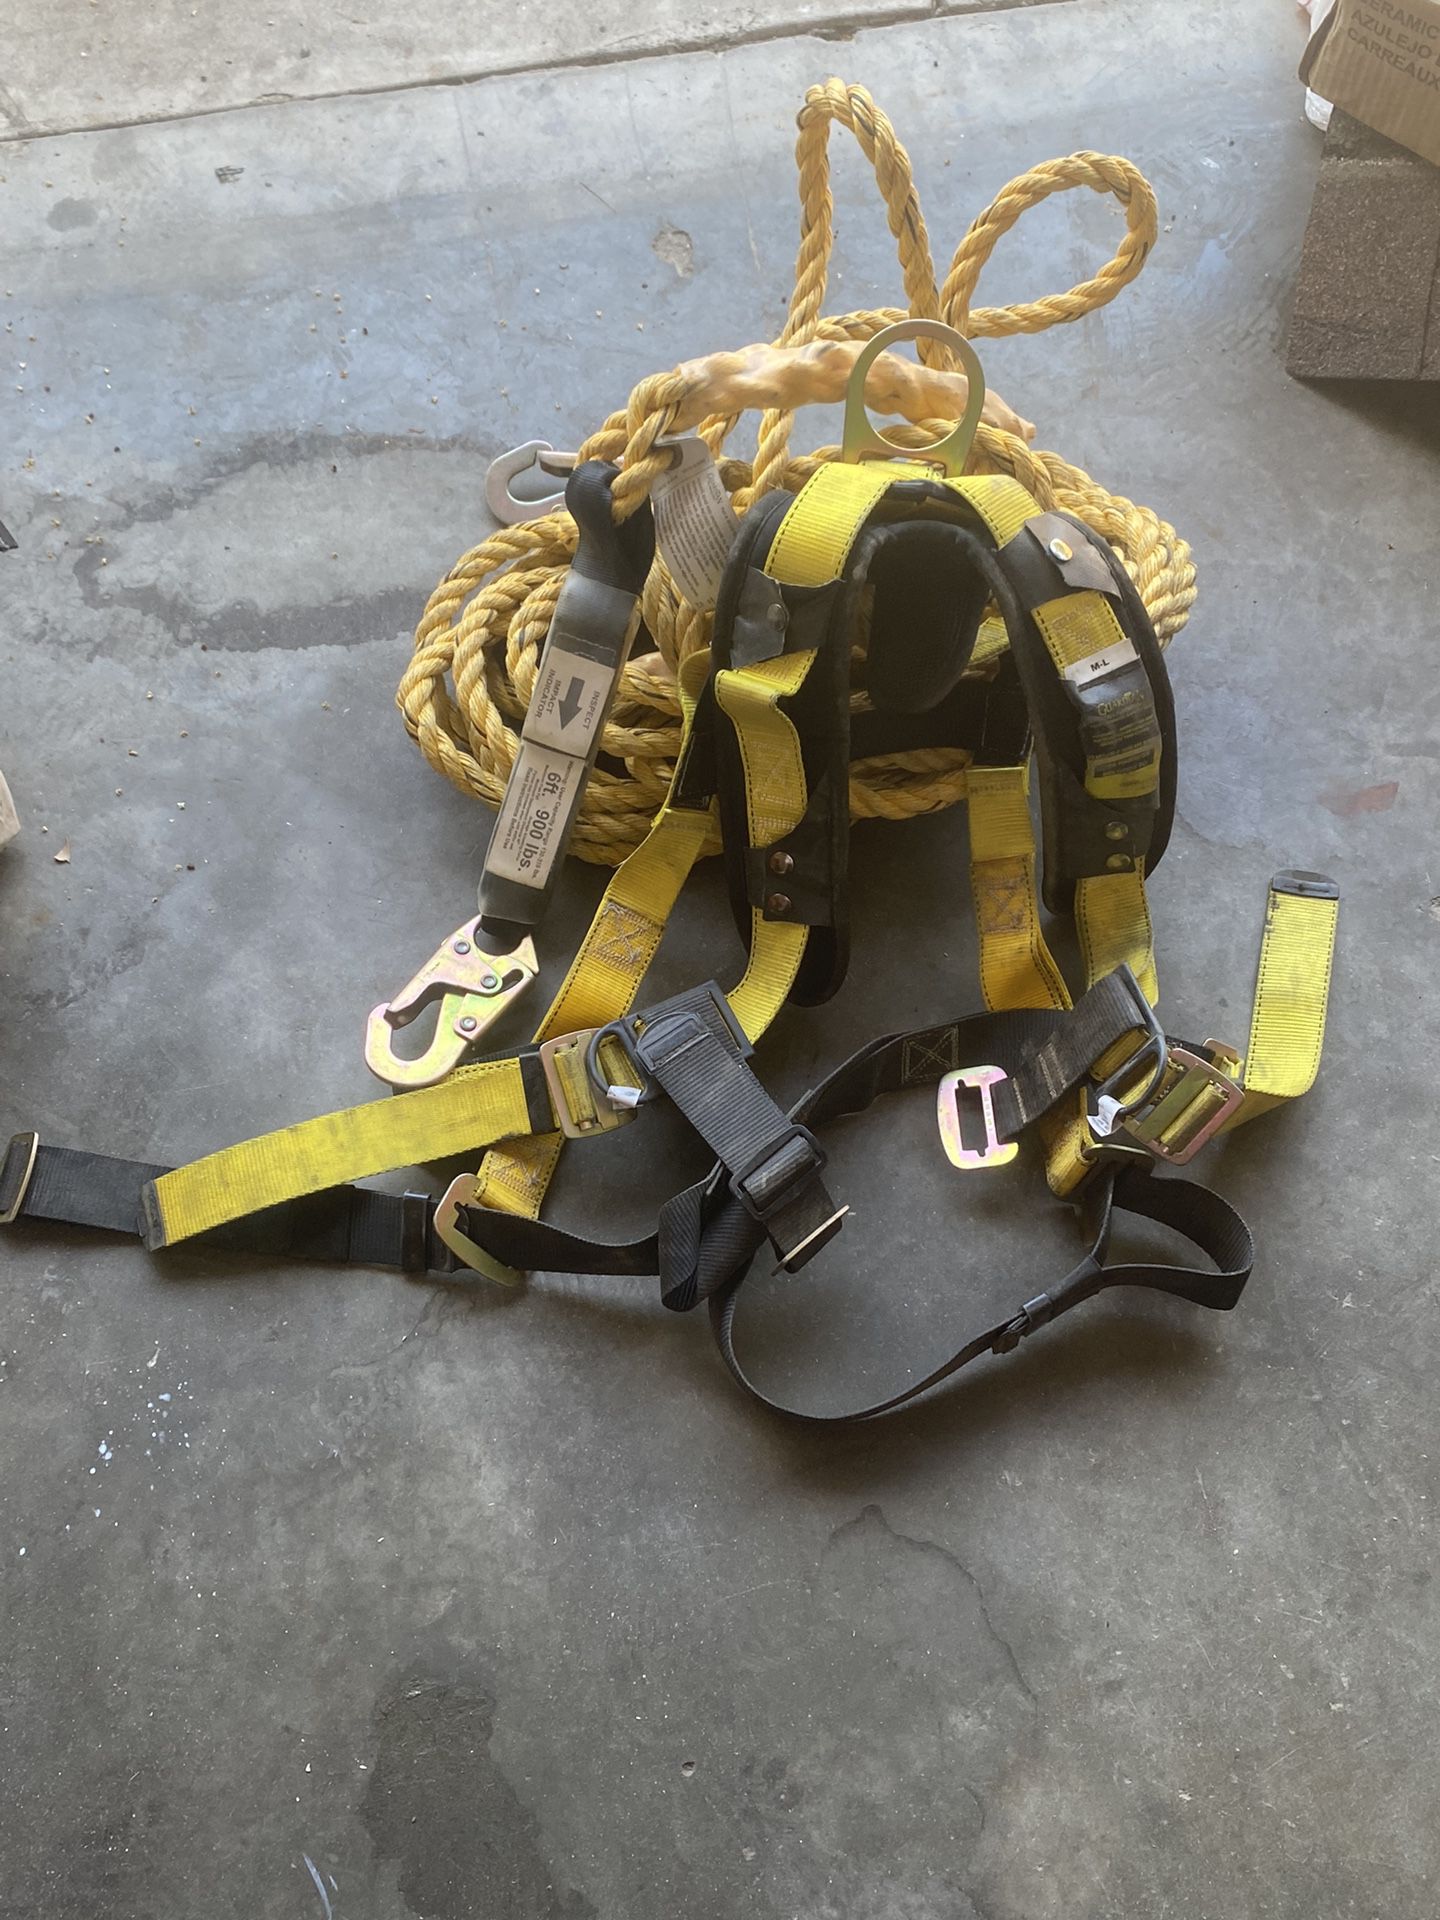 Roofing Harness